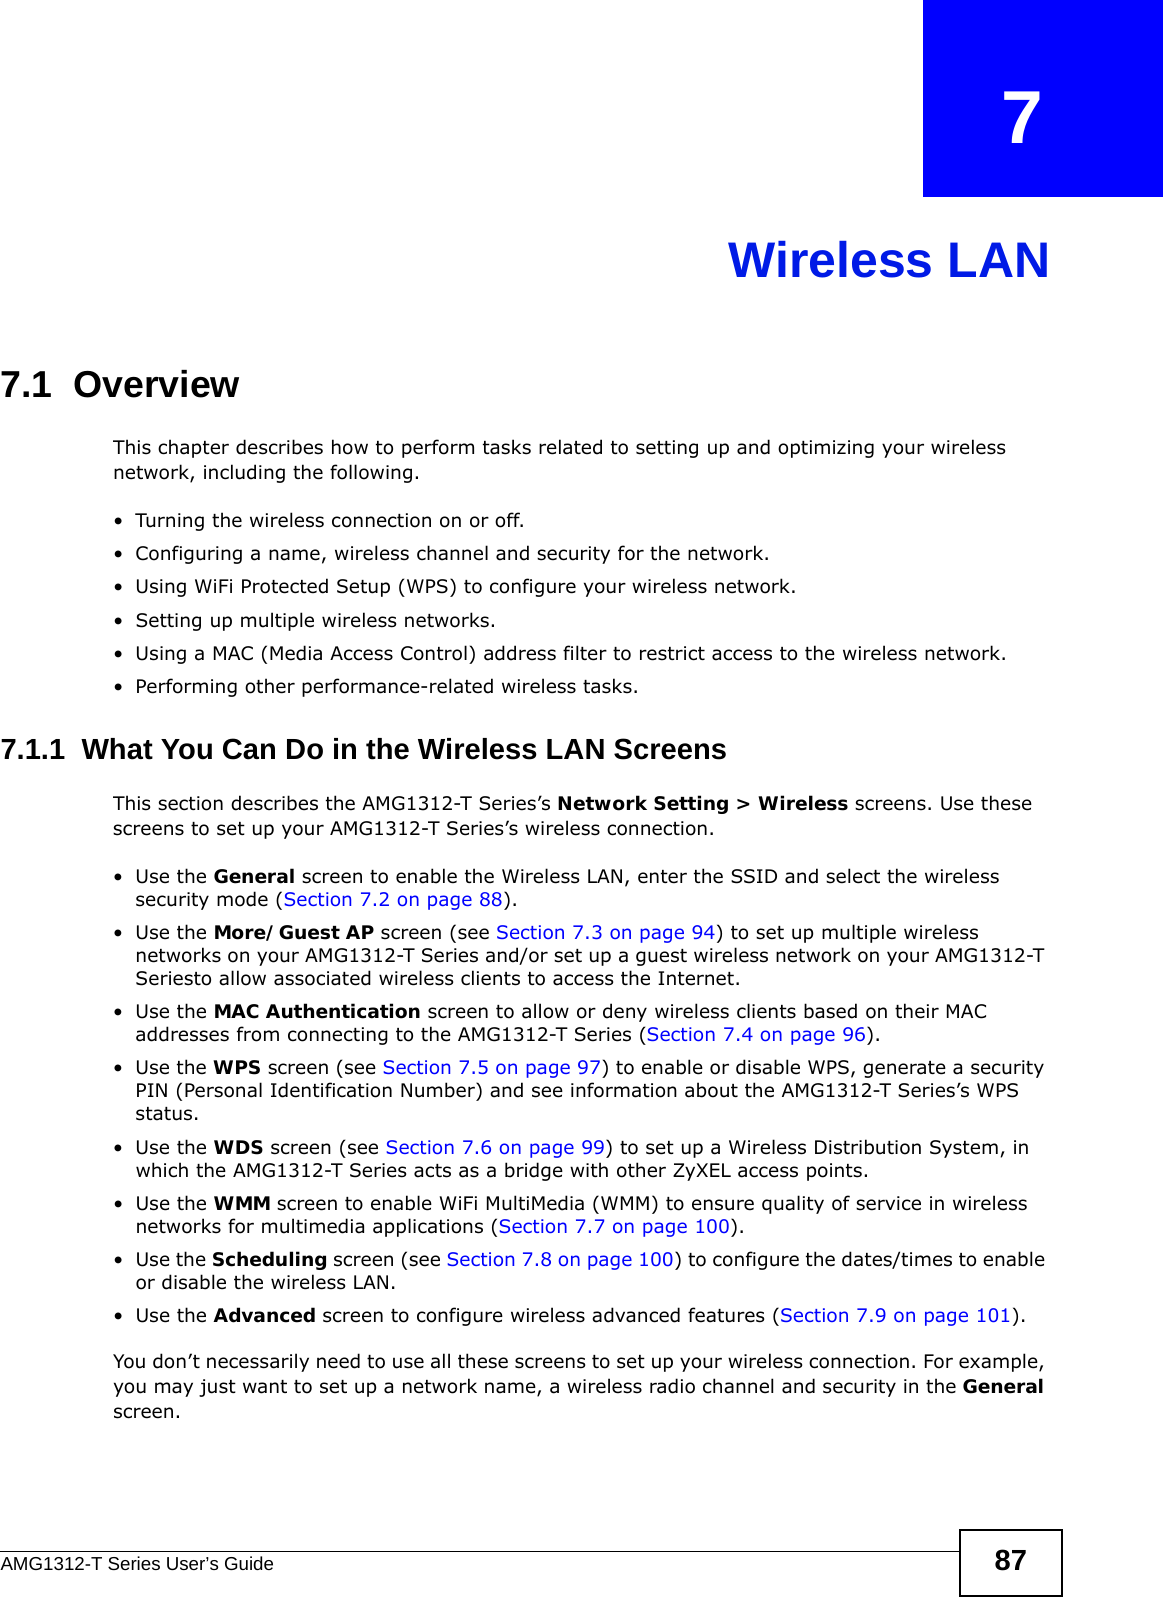 AMG1312-T Series User’s Guide 87CHAPTER   7Wireless LAN7.1  Overview This chapter describes how to perform tasks related to setting up and optimizing your wireless network, including the following.• Turning the wireless connection on or off.• Configuring a name, wireless channel and security for the network.• Using WiFi Protected Setup (WPS) to configure your wireless network.• Setting up multiple wireless networks.• Using a MAC (Media Access Control) address filter to restrict access to the wireless network.• Performing other performance-related wireless tasks.7.1.1  What You Can Do in the Wireless LAN ScreensThis section describes the AMG1312-T Series’s Network Setting &gt; Wireless screens. Use these screens to set up your AMG1312-T Series’s wireless connection.•Use the General screen to enable the Wireless LAN, enter the SSID and select the wireless security mode (Section 7.2 on page 88).•Use the More/Guest AP screen (see Section 7.3 on page 94) to set up multiple wireless networks on your AMG1312-T Series and/or set up a guest wireless network on your AMG1312-T Seriesto allow associated wireless clients to access the Internet.•Use the MAC Authentication screen to allow or deny wireless clients based on their MAC addresses from connecting to the AMG1312-T Series (Section 7.4 on page 96).•Use the WPS screen (see Section 7.5 on page 97) to enable or disable WPS, generate a security PIN (Personal Identification Number) and see information about the AMG1312-T Series’s WPS status.•Use the WDS screen (see Section 7.6 on page 99) to set up a Wireless Distribution System, in which the AMG1312-T Series acts as a bridge with other ZyXEL access points.•Use the WMM screen to enable WiFi MultiMedia (WMM) to ensure quality of service in wireless networks for multimedia applications (Section 7.7 on page 100). •Use the Scheduling screen (see Section 7.8 on page 100) to configure the dates/times to enable or disable the wireless LAN.•Use the Advanced screen to configure wireless advanced features (Section 7.9 on page 101).You don’t necessarily need to use all these screens to set up your wireless connection. For example, you may just want to set up a network name, a wireless radio channel and security in the General screen.